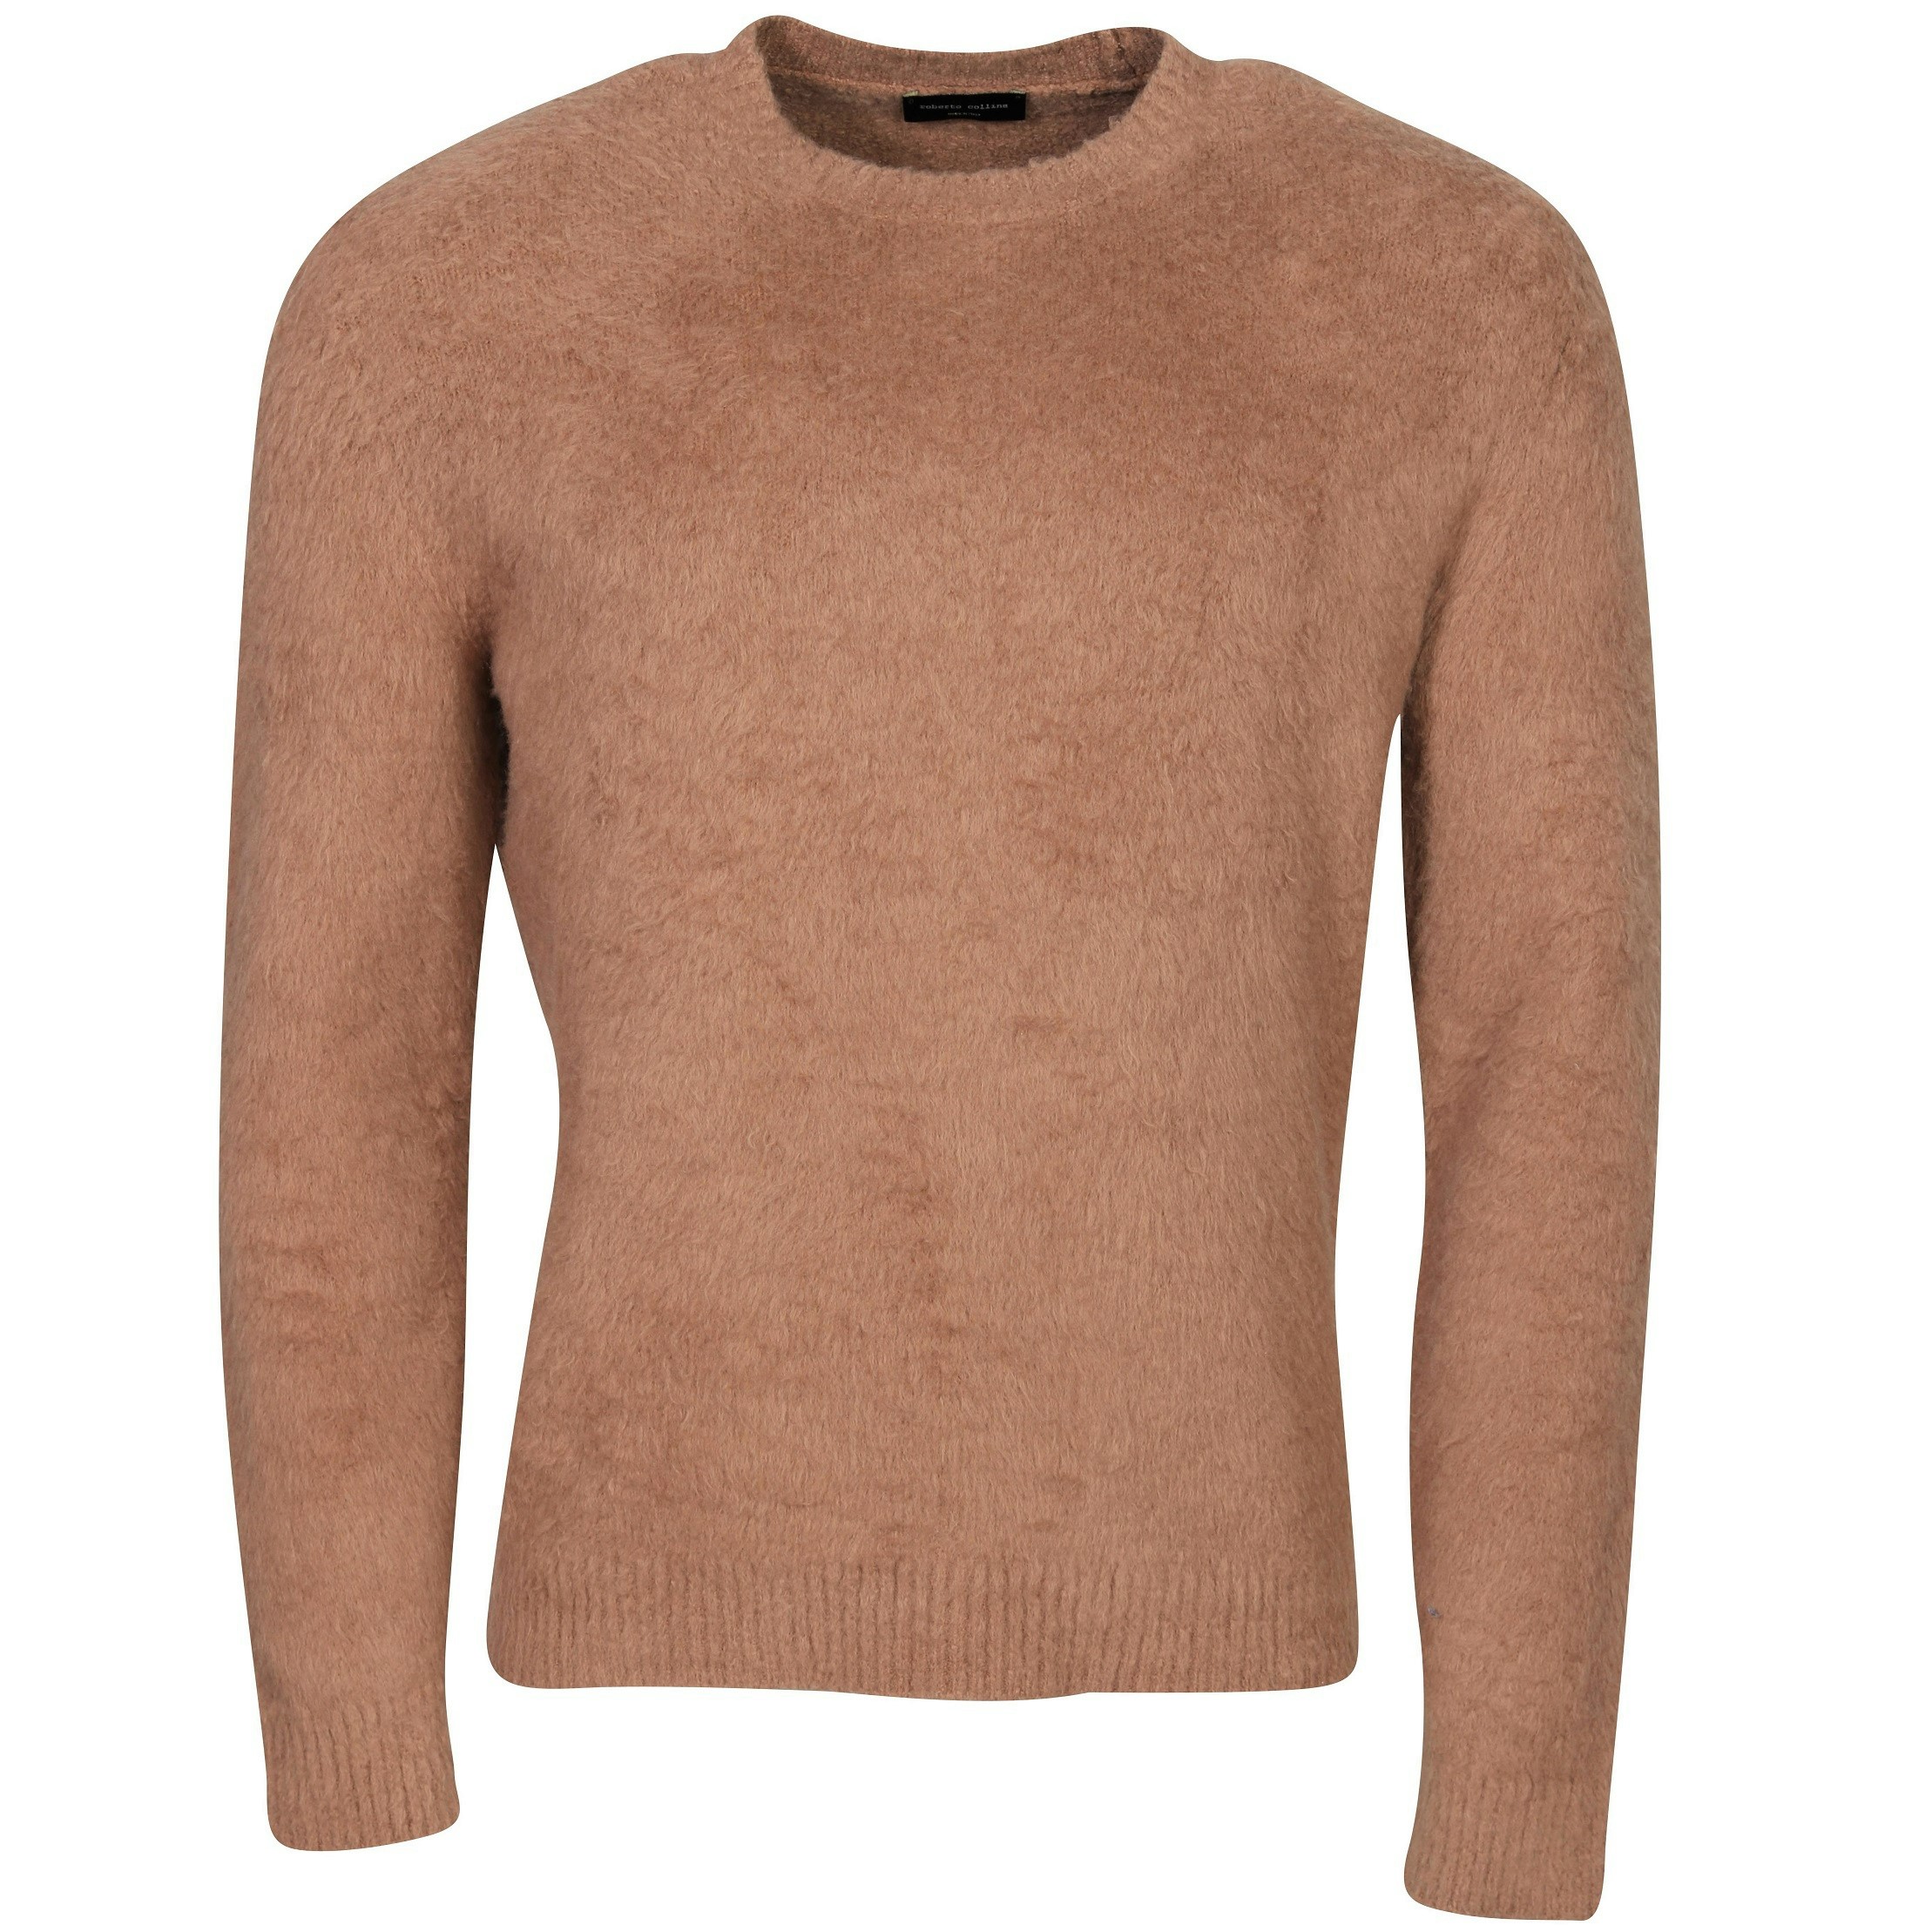 ROBERTO COLLINA Fluffy Cotton Knit Pullover in Camel